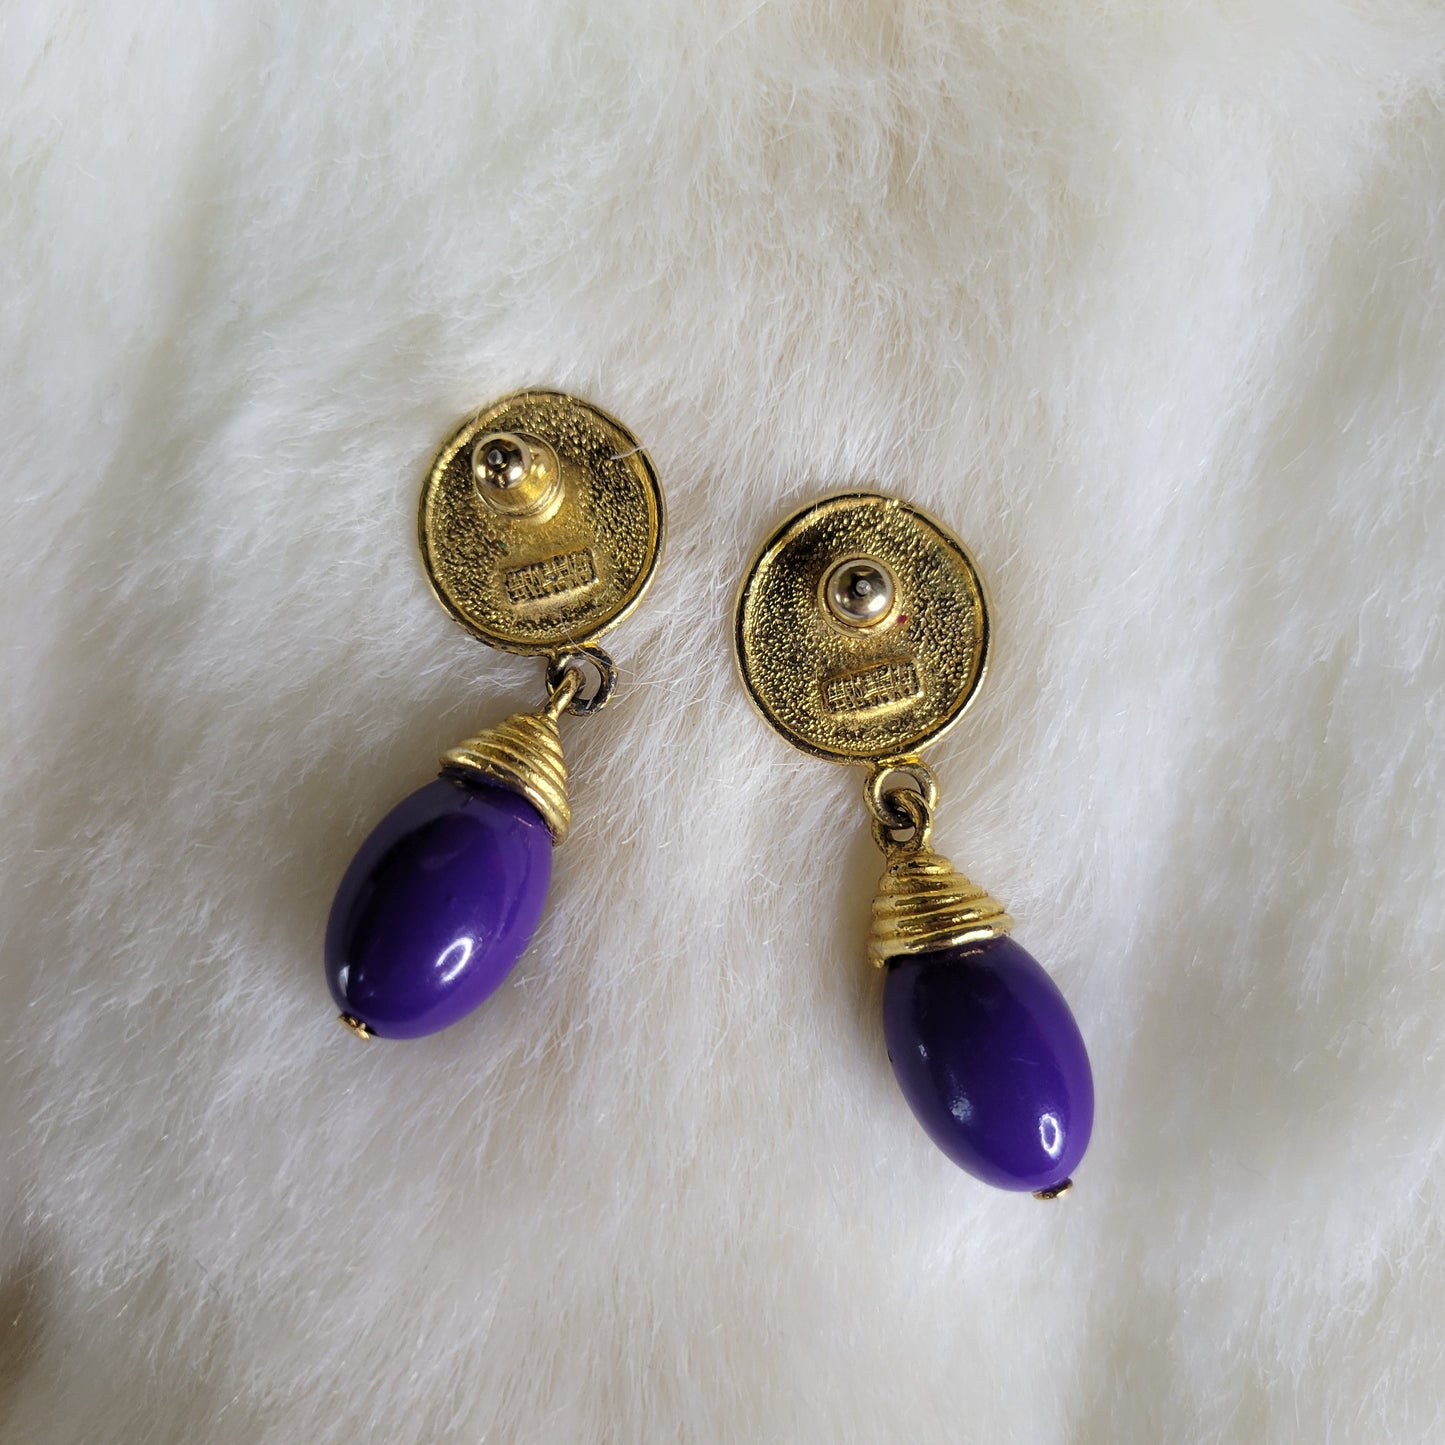 Gold and Pink with Purple Gumdrop Vintage Earrings - Pierced